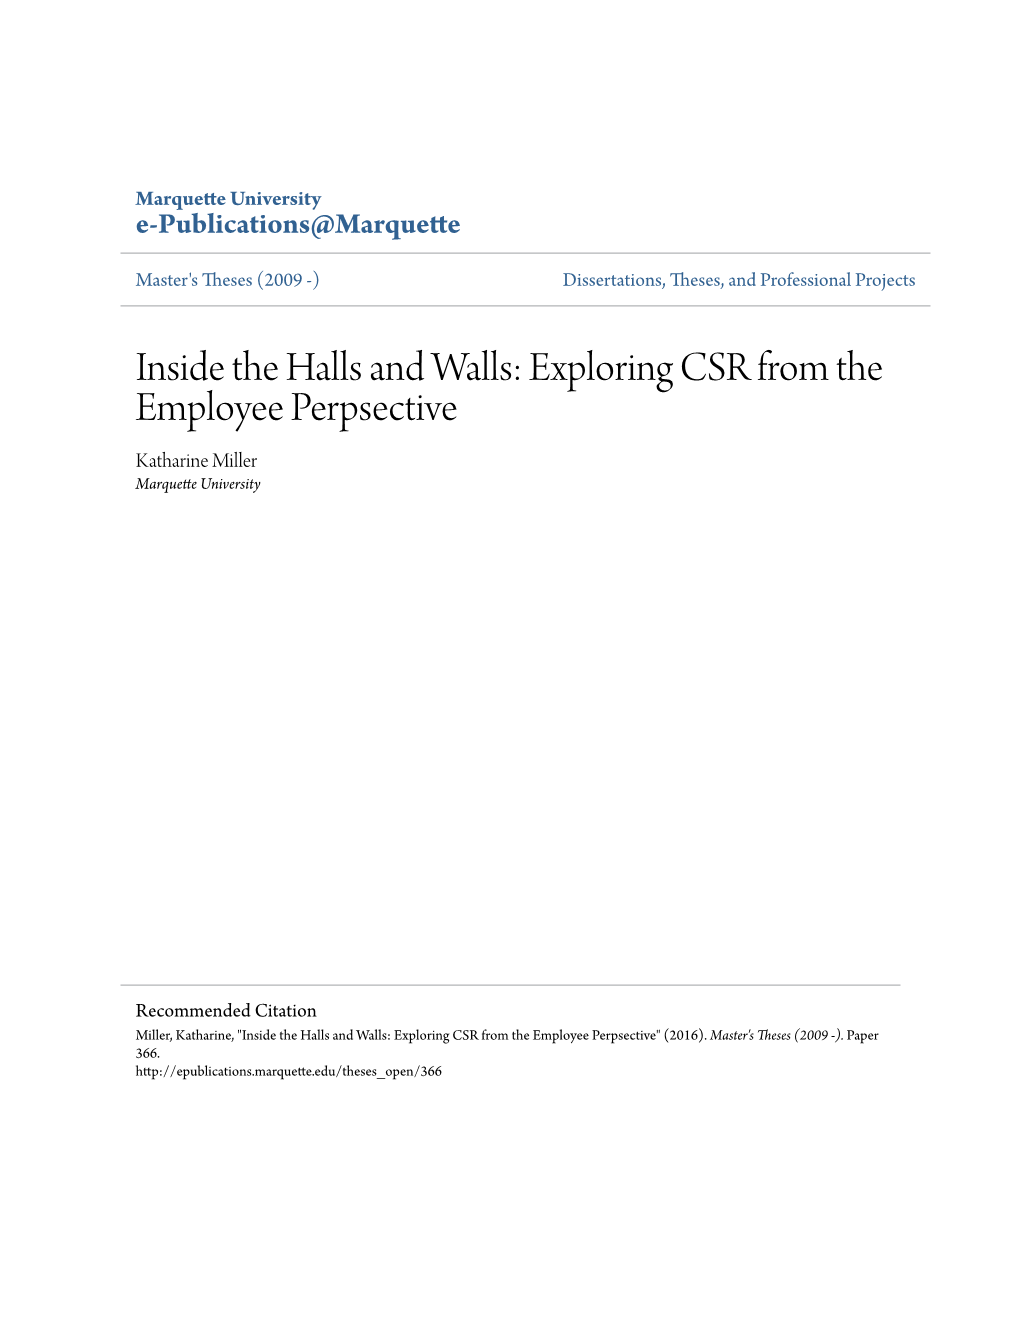 Inside the Halls and Walls: Exploring CSR from the Employee Perpsective Katharine Miller Marquette University